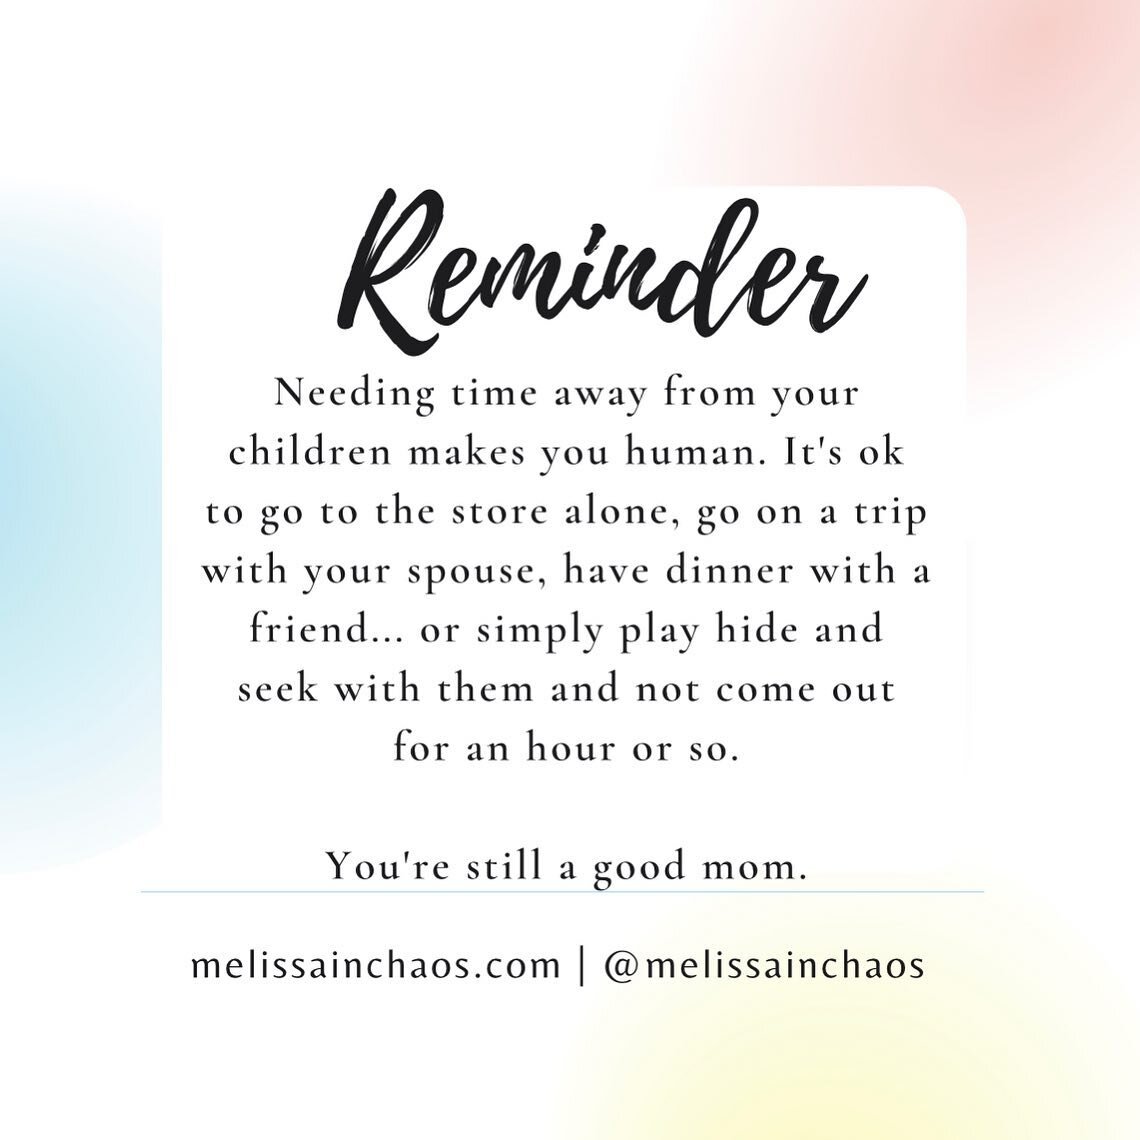 It&rsquo;s easy to get caught up in the guilt of leaving your kids. Logistically going places without them can be a nightmare. But your mental health needs you to take some time for yourself. As parents we often neglect our own needs for the needs of